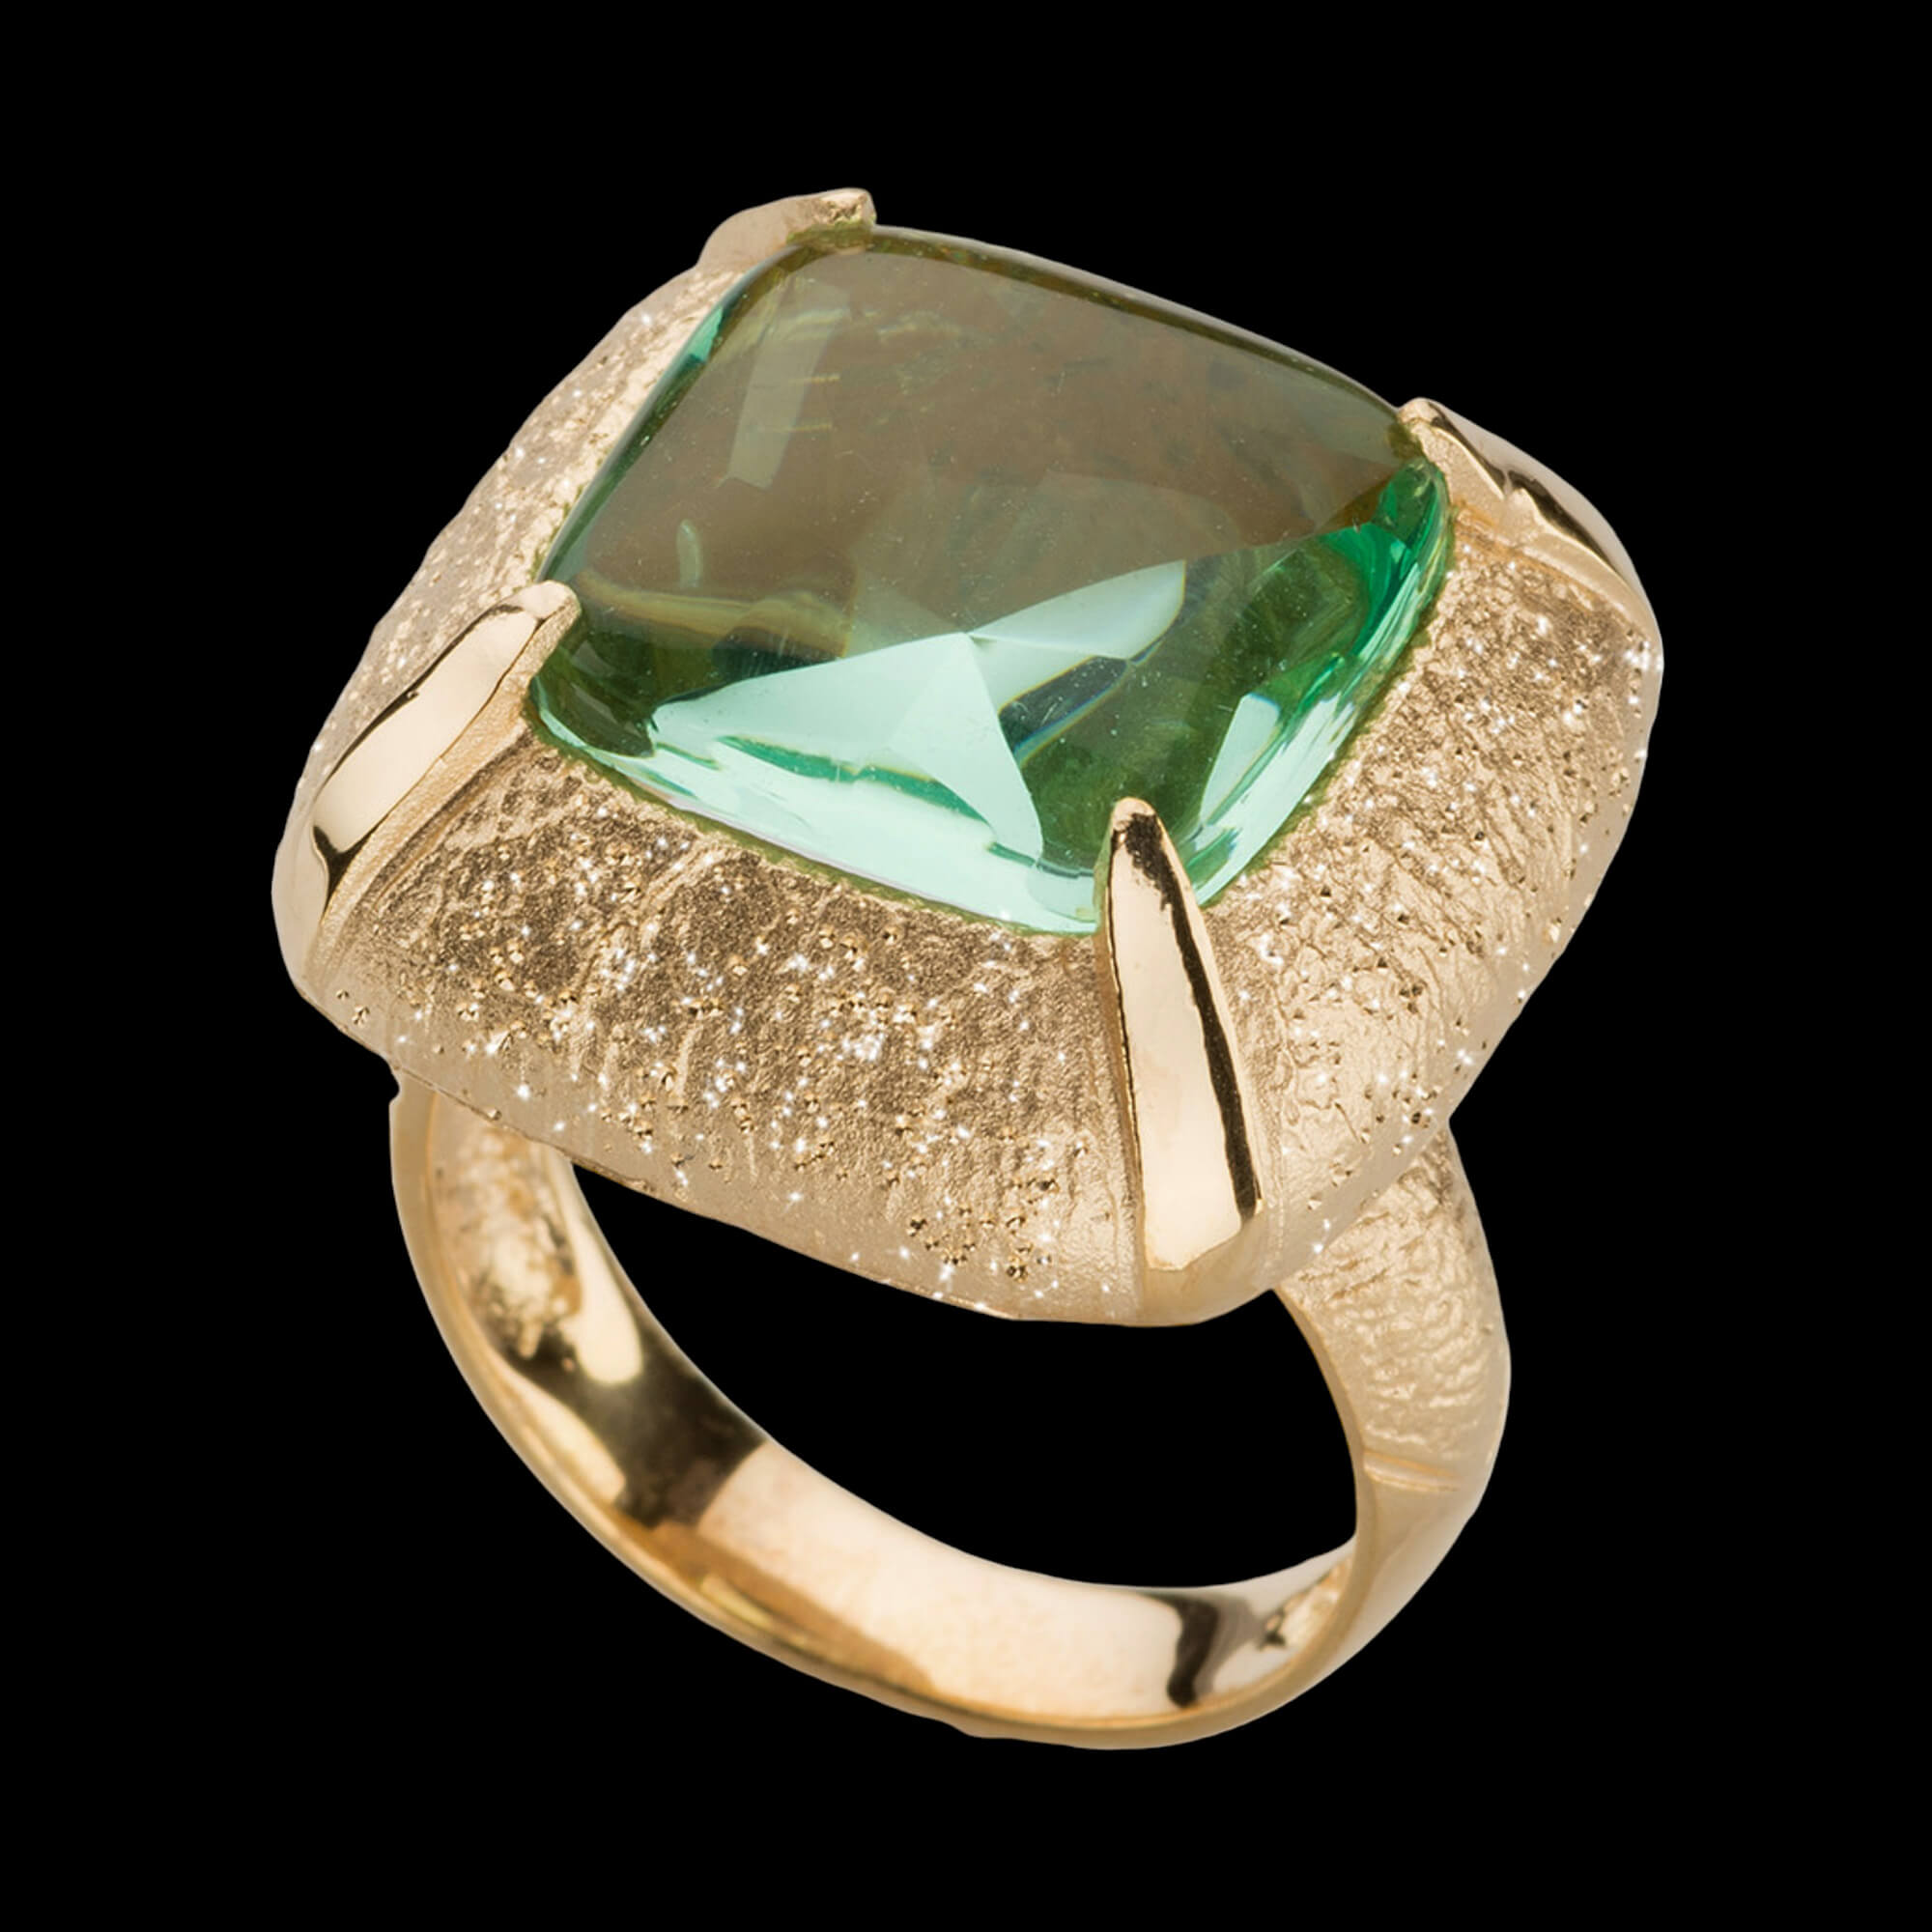 Gilded square -shaped ring with a green stone